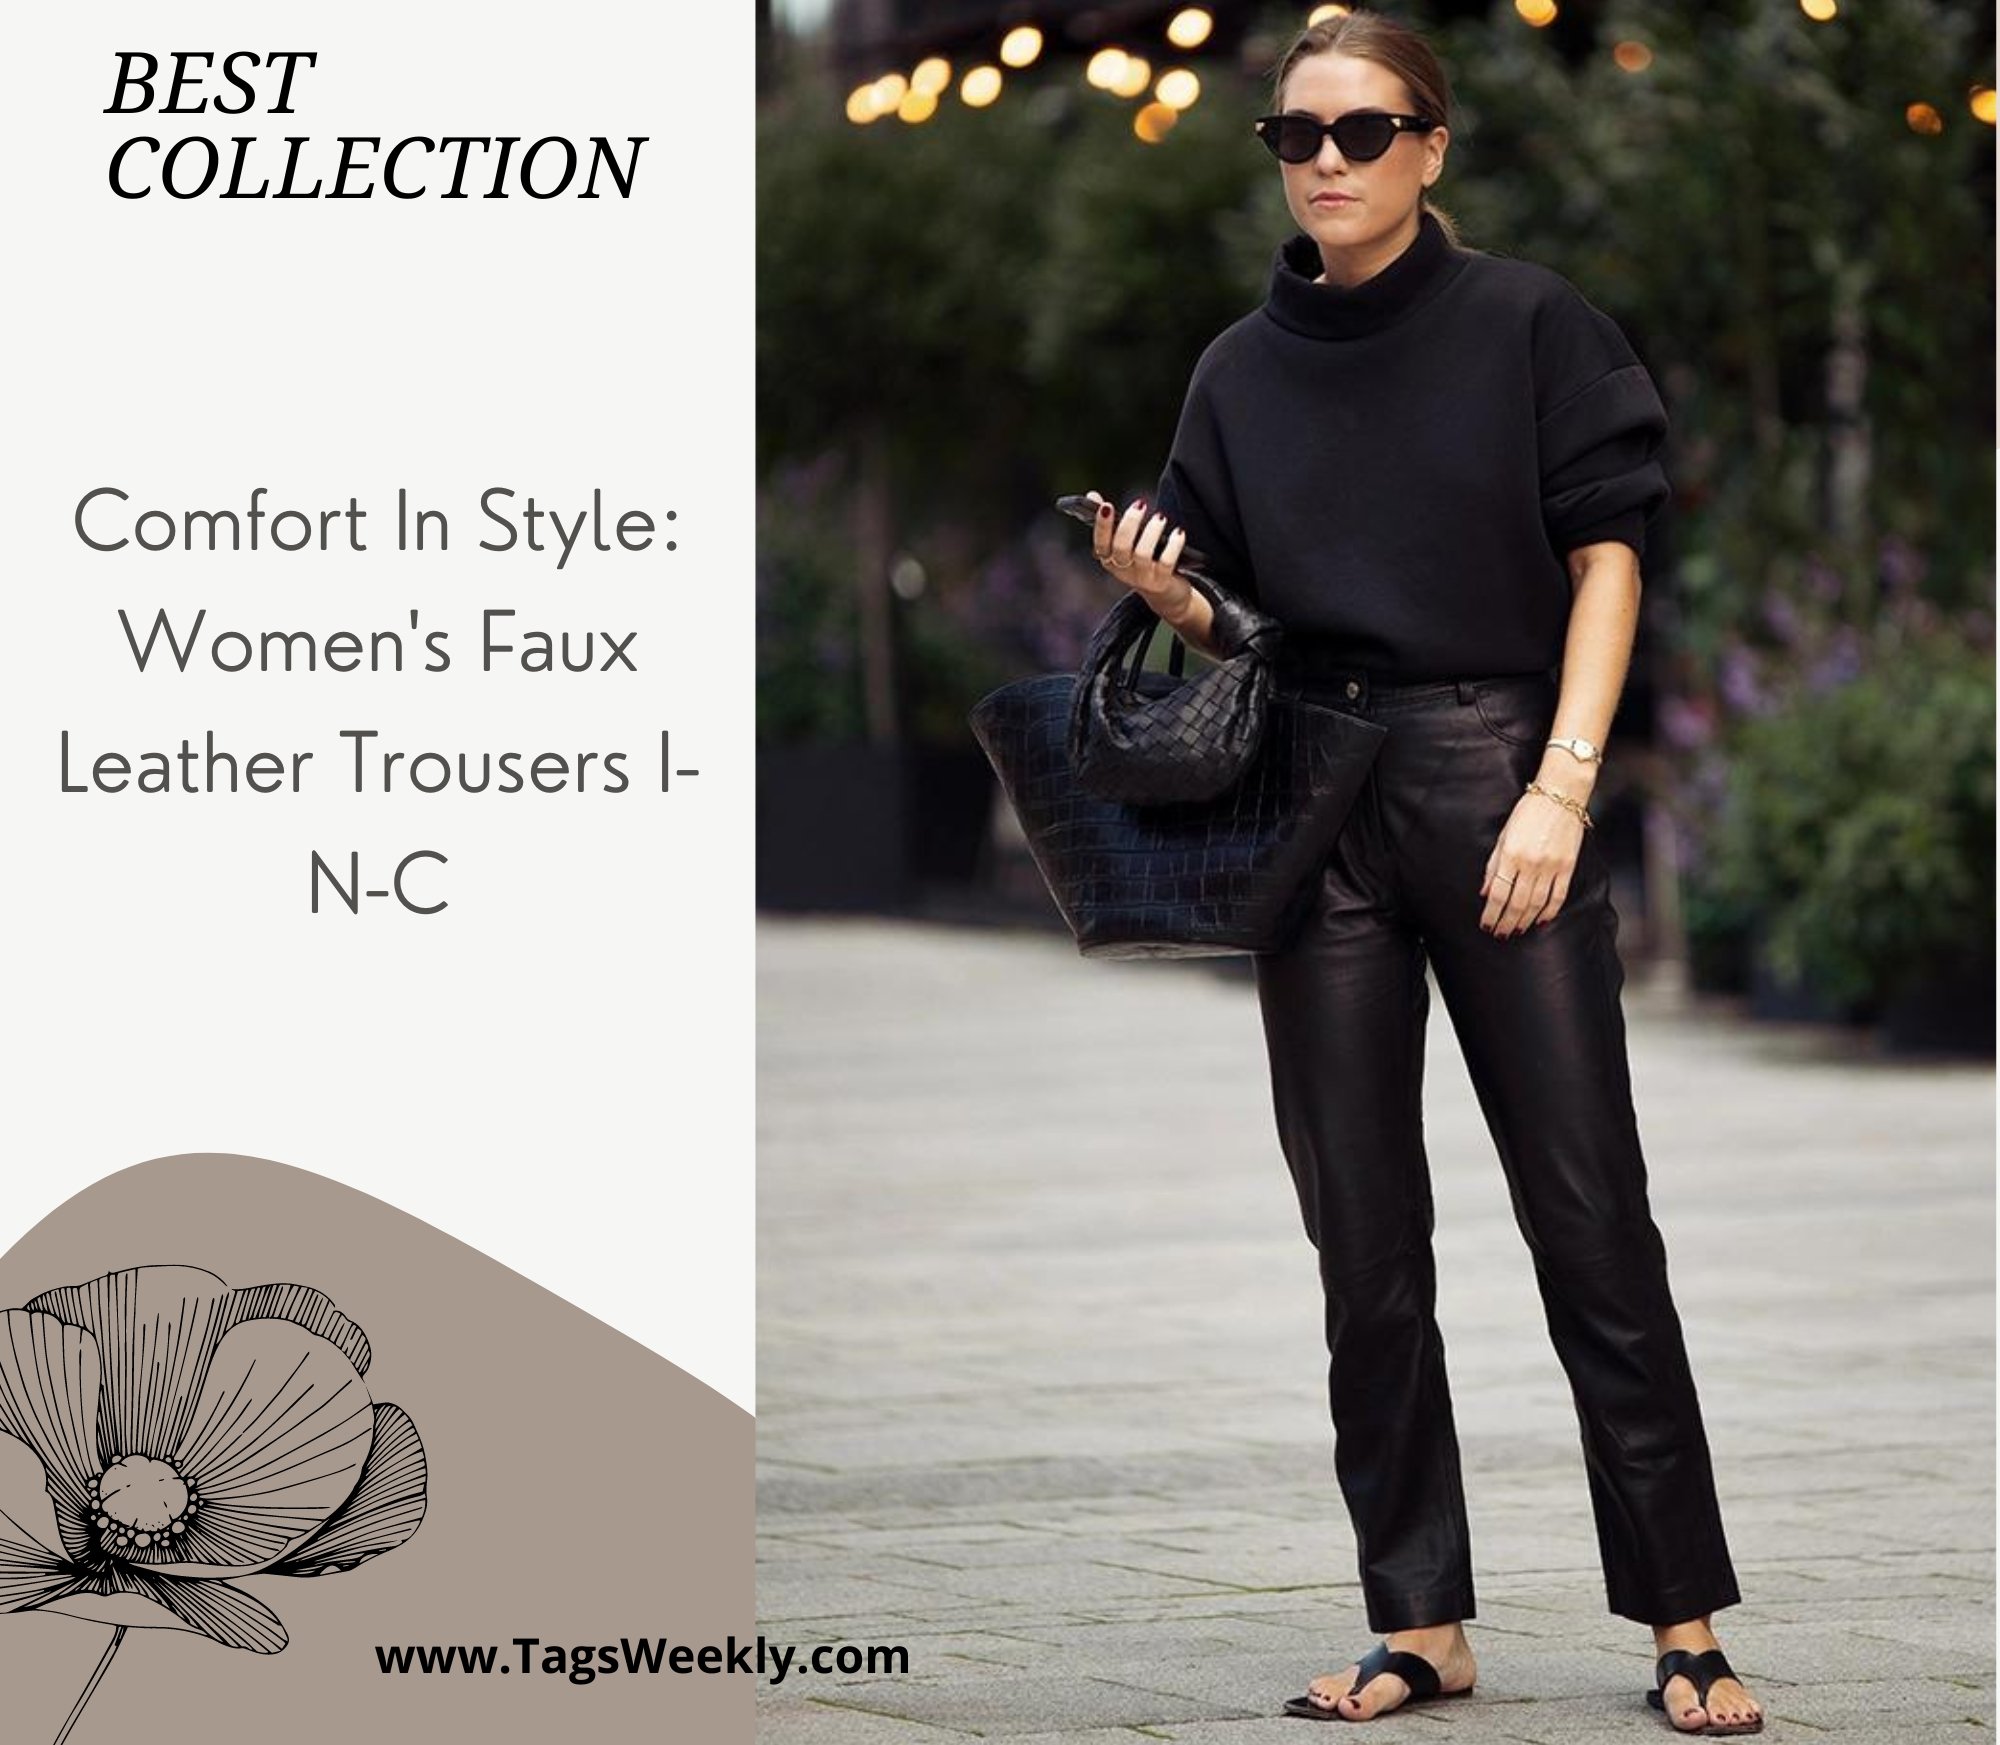 Comfort In Style: Women's Faux Leather Trousers I-N-C